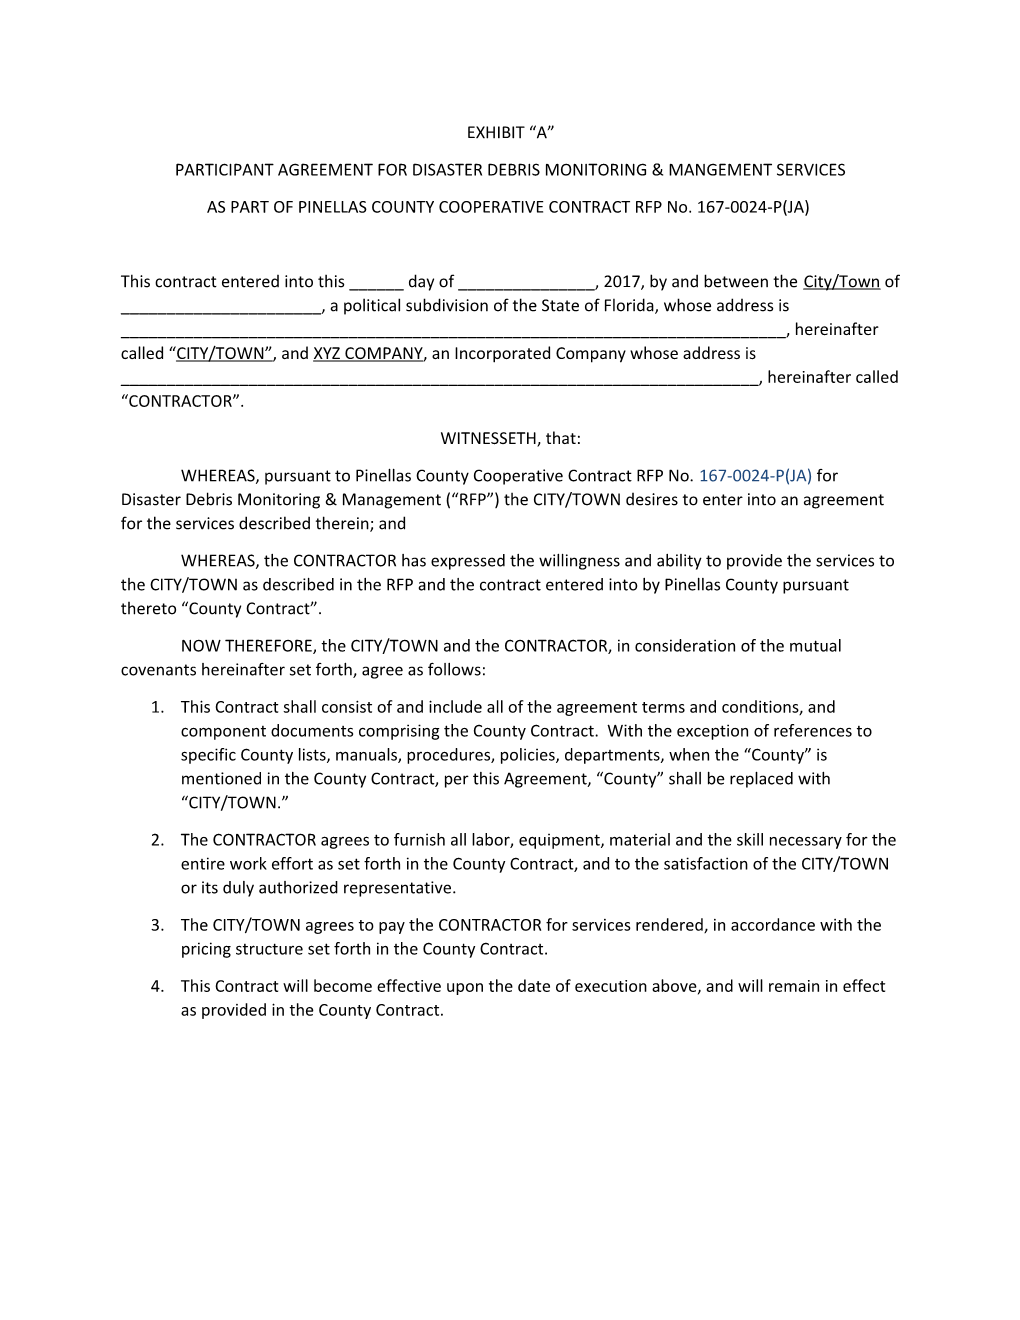 Participant Agreement for Disaster Debris Monitoring & Mangement Services